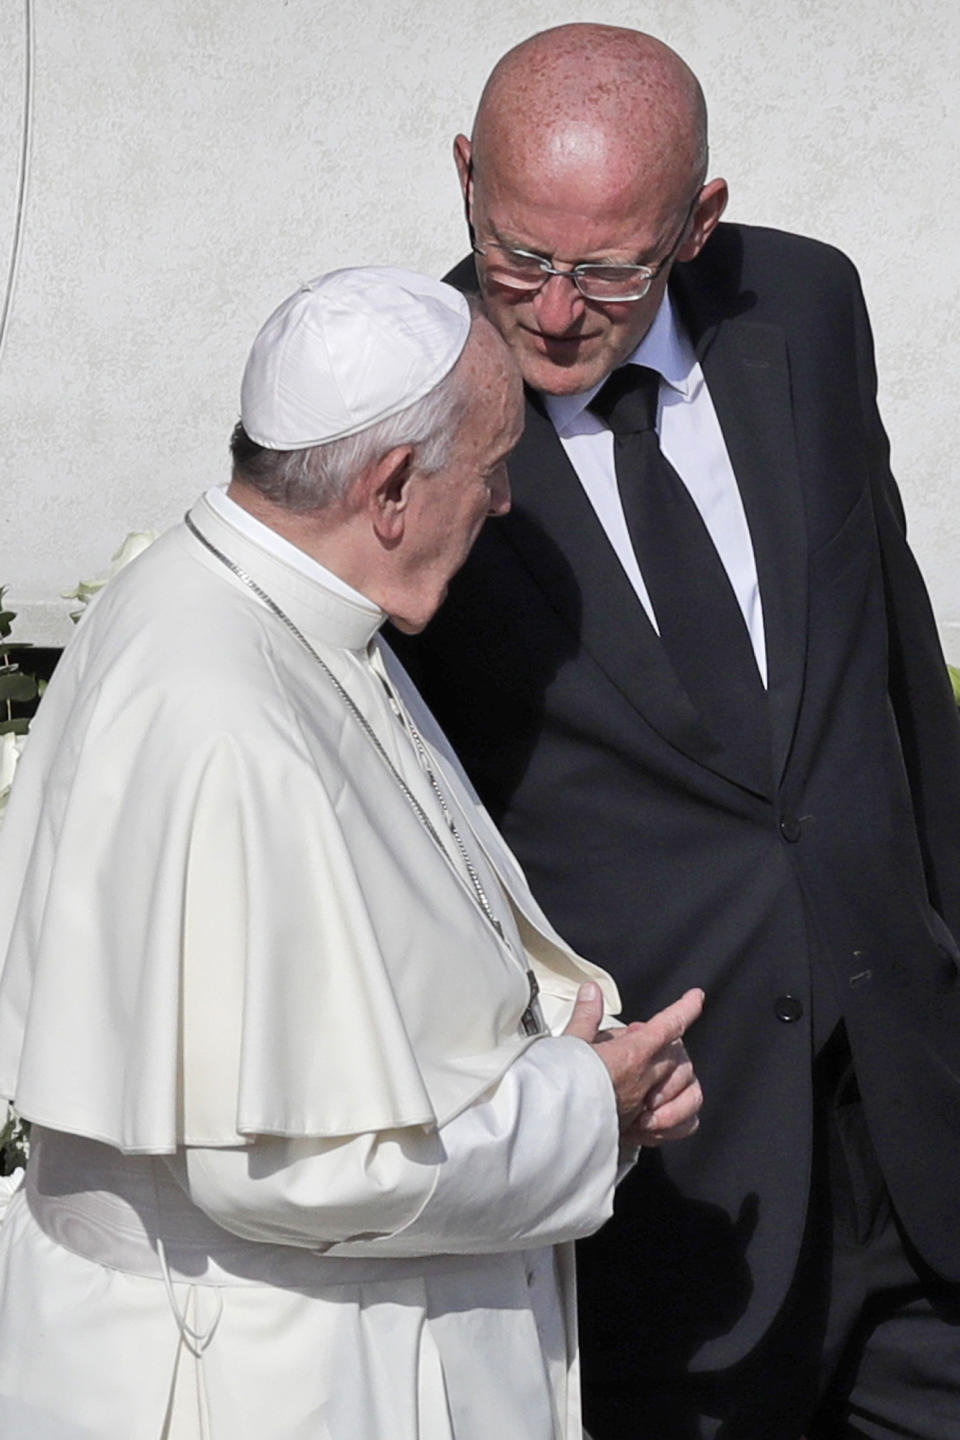 Vatican head of security Domenico Giani, right, shares a word with Pope Francis at the end of a canonization Mass in St. Peter's Square at the Vatican, Sunday, Oct. 13, 2019. The Vatican said Monday Oct. 14, 2019 that Francis’ chief bodyguard Giani has resigned over the leak of a Vatican police flyer identifying five Holy See employees who were suspended as part of a financial investigation, adding that Giani bore no responsibility for the leak, but that he had resigned to ensure the serenity of the investigation and “out of love for the church and faithfulness” to the pope. (AP Photo/Alessandra Tarantino)